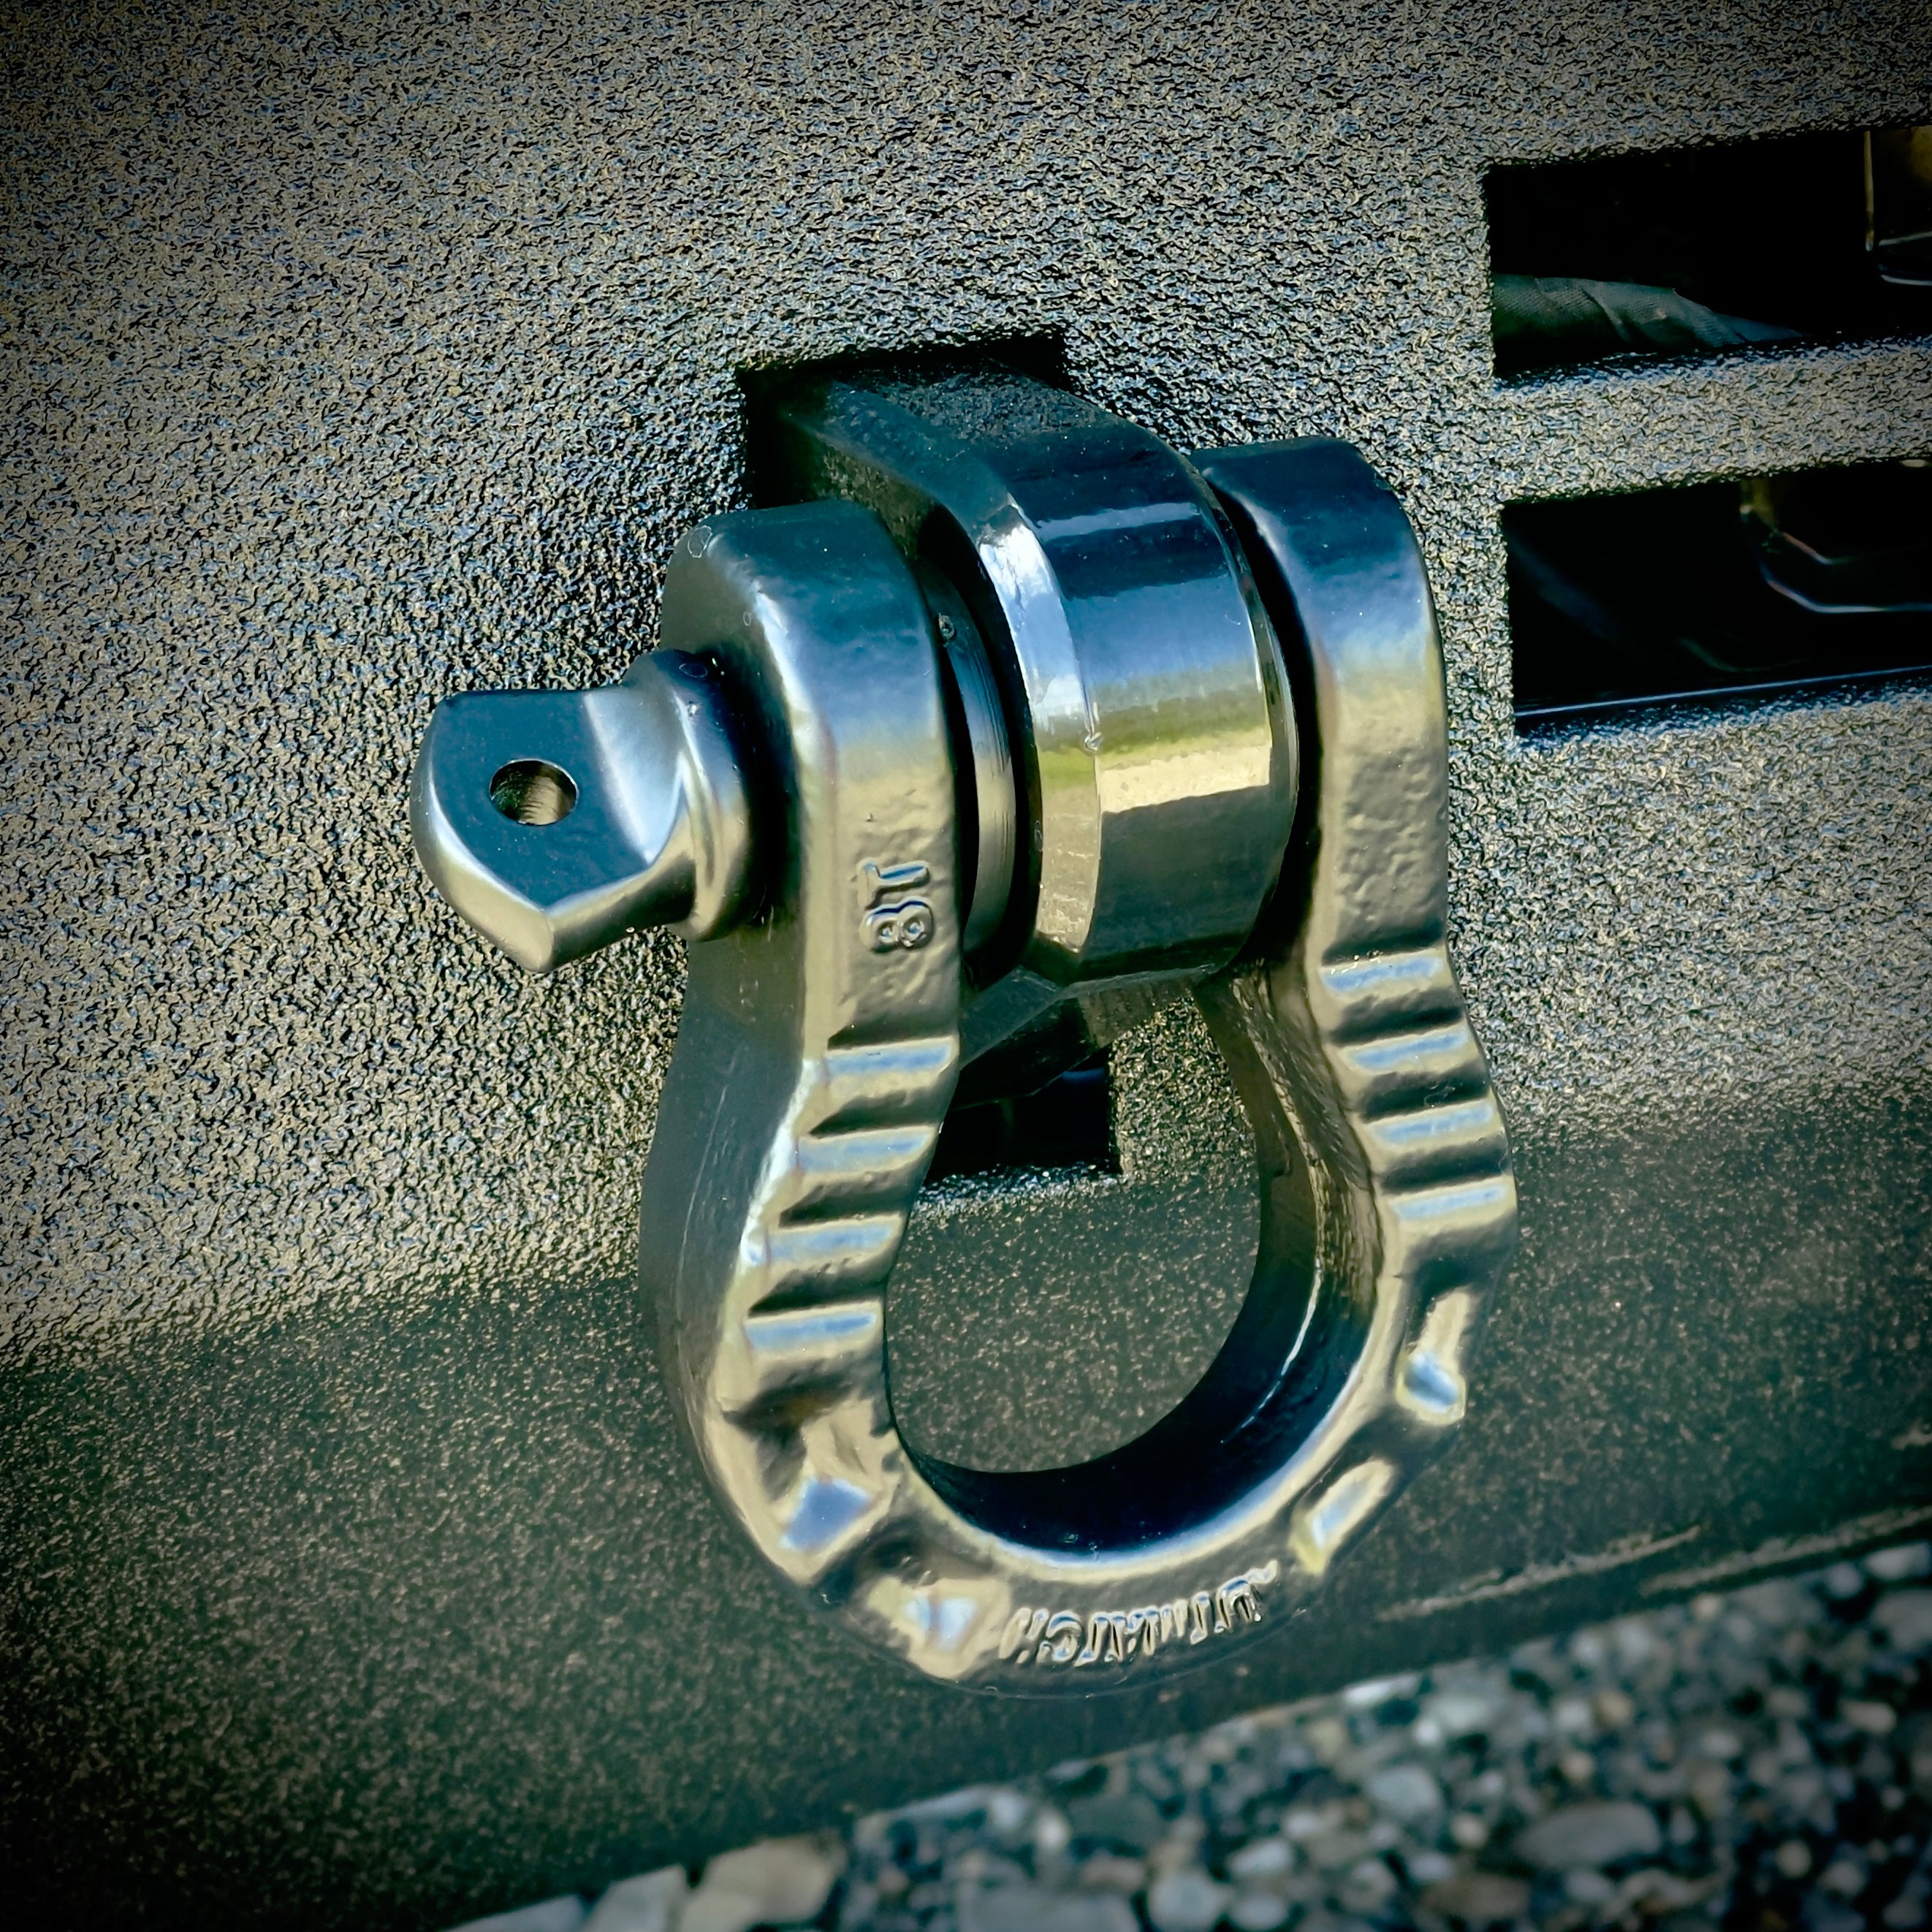 D-Ring Shackles, what are they used for?